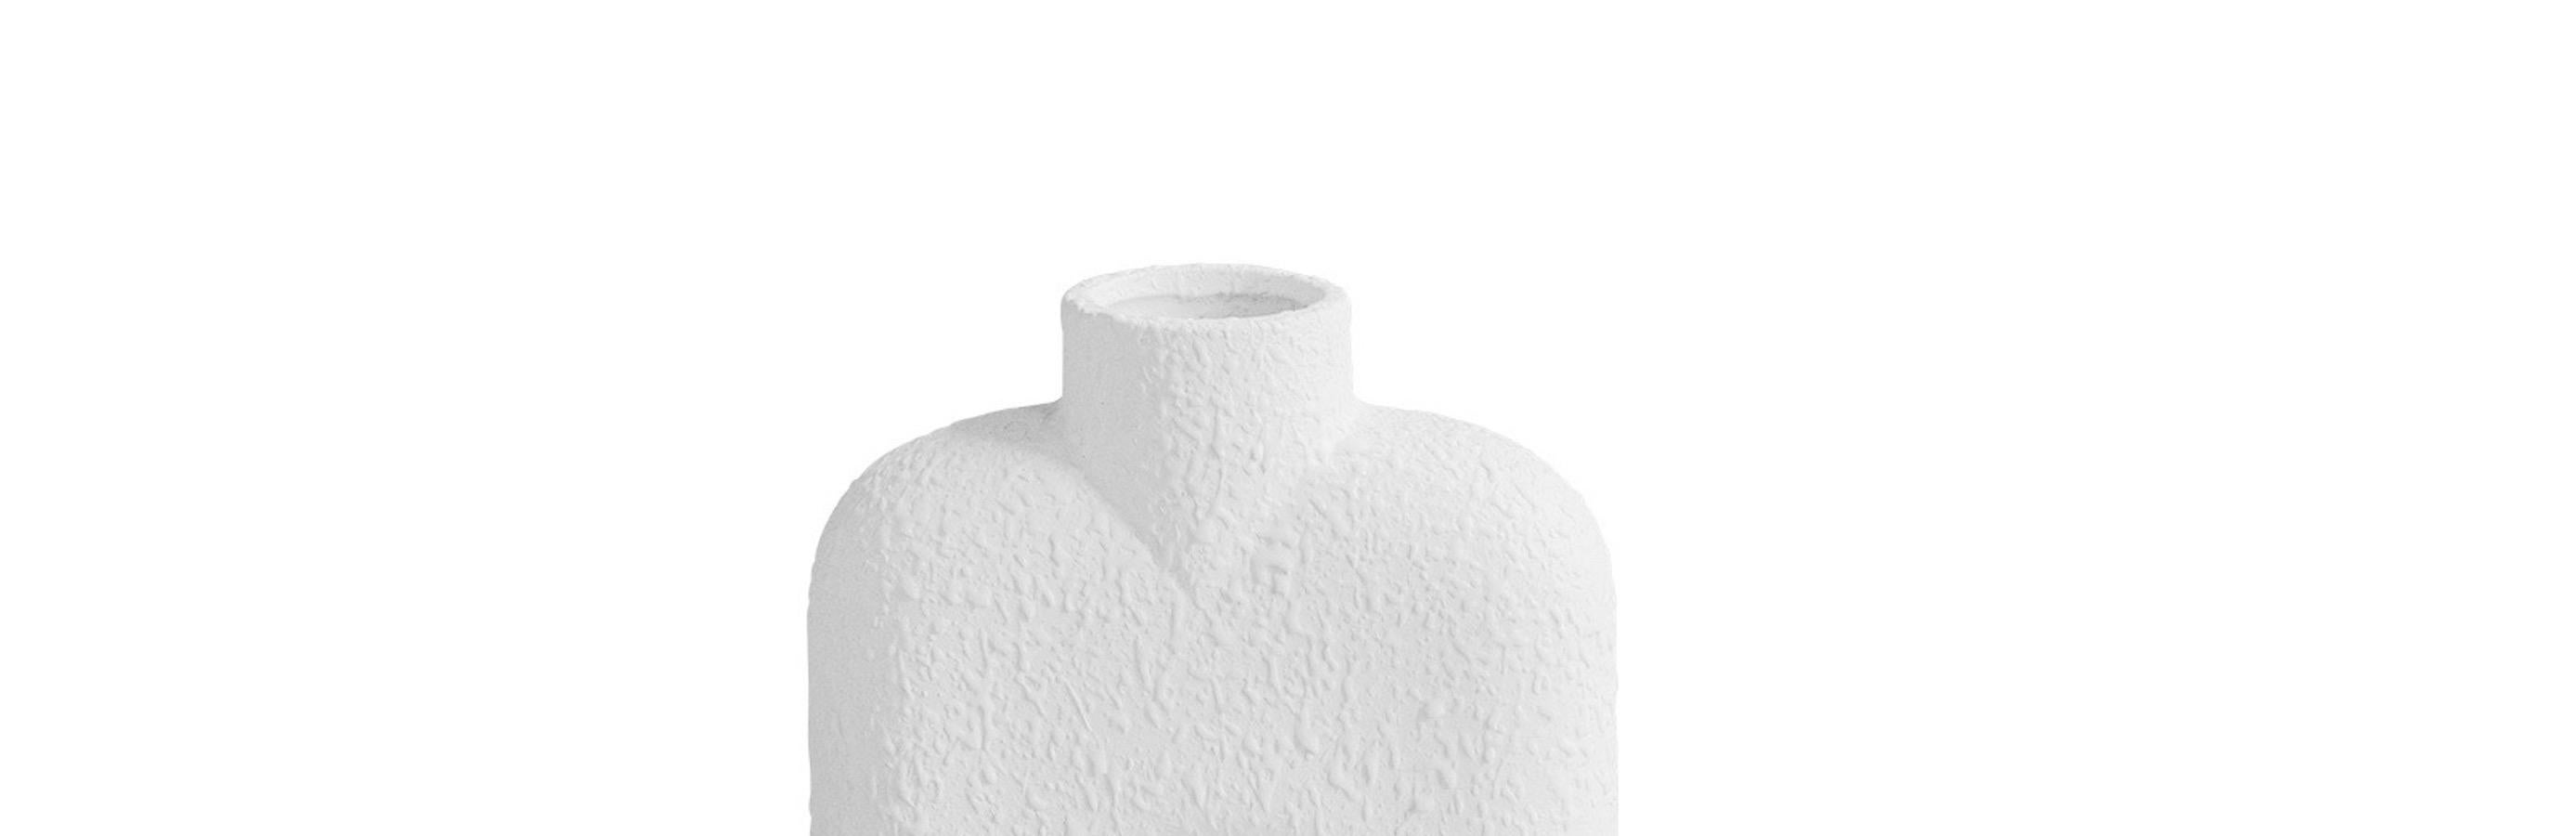 Contemporary Danish design tall textured white ceramic vase with a single center round spout on a base of two round spheres.
Very sculptural in design.
Two available and sold individually.
 

   